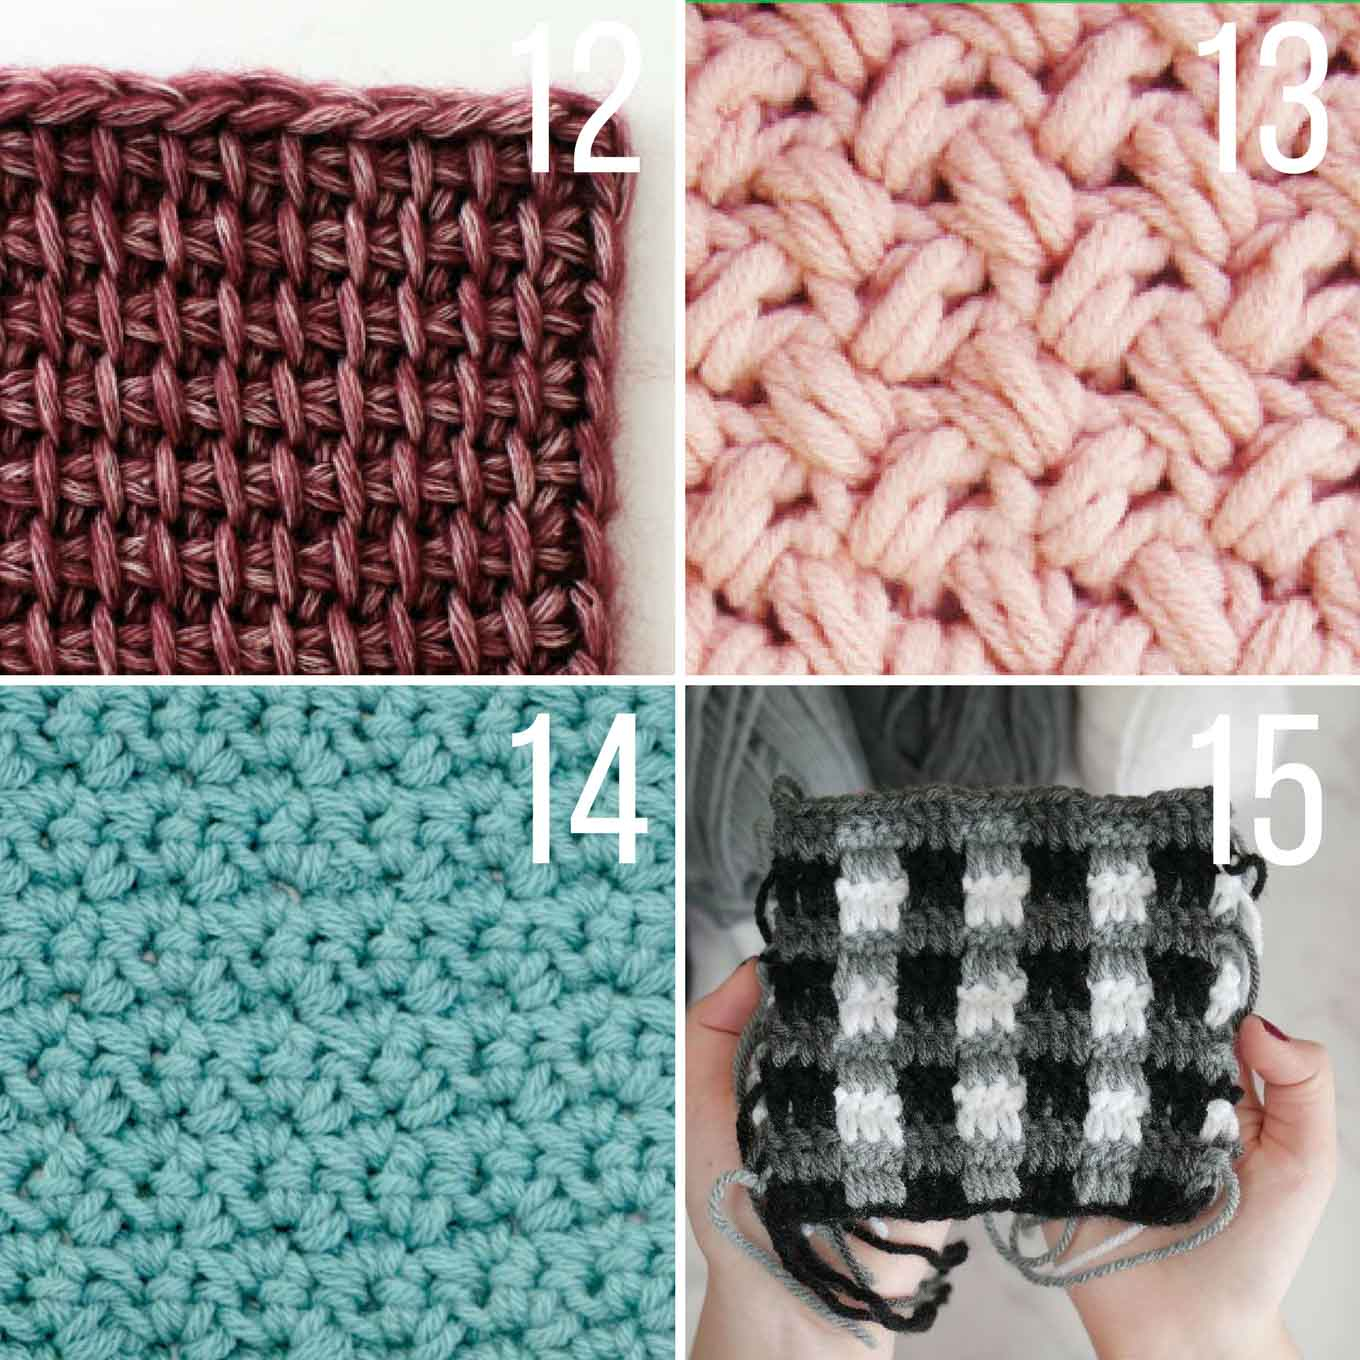 Free Afghan Stitch Crochet Patterns 30 Crochet Stitches For Blankets And Afghans Many With Video